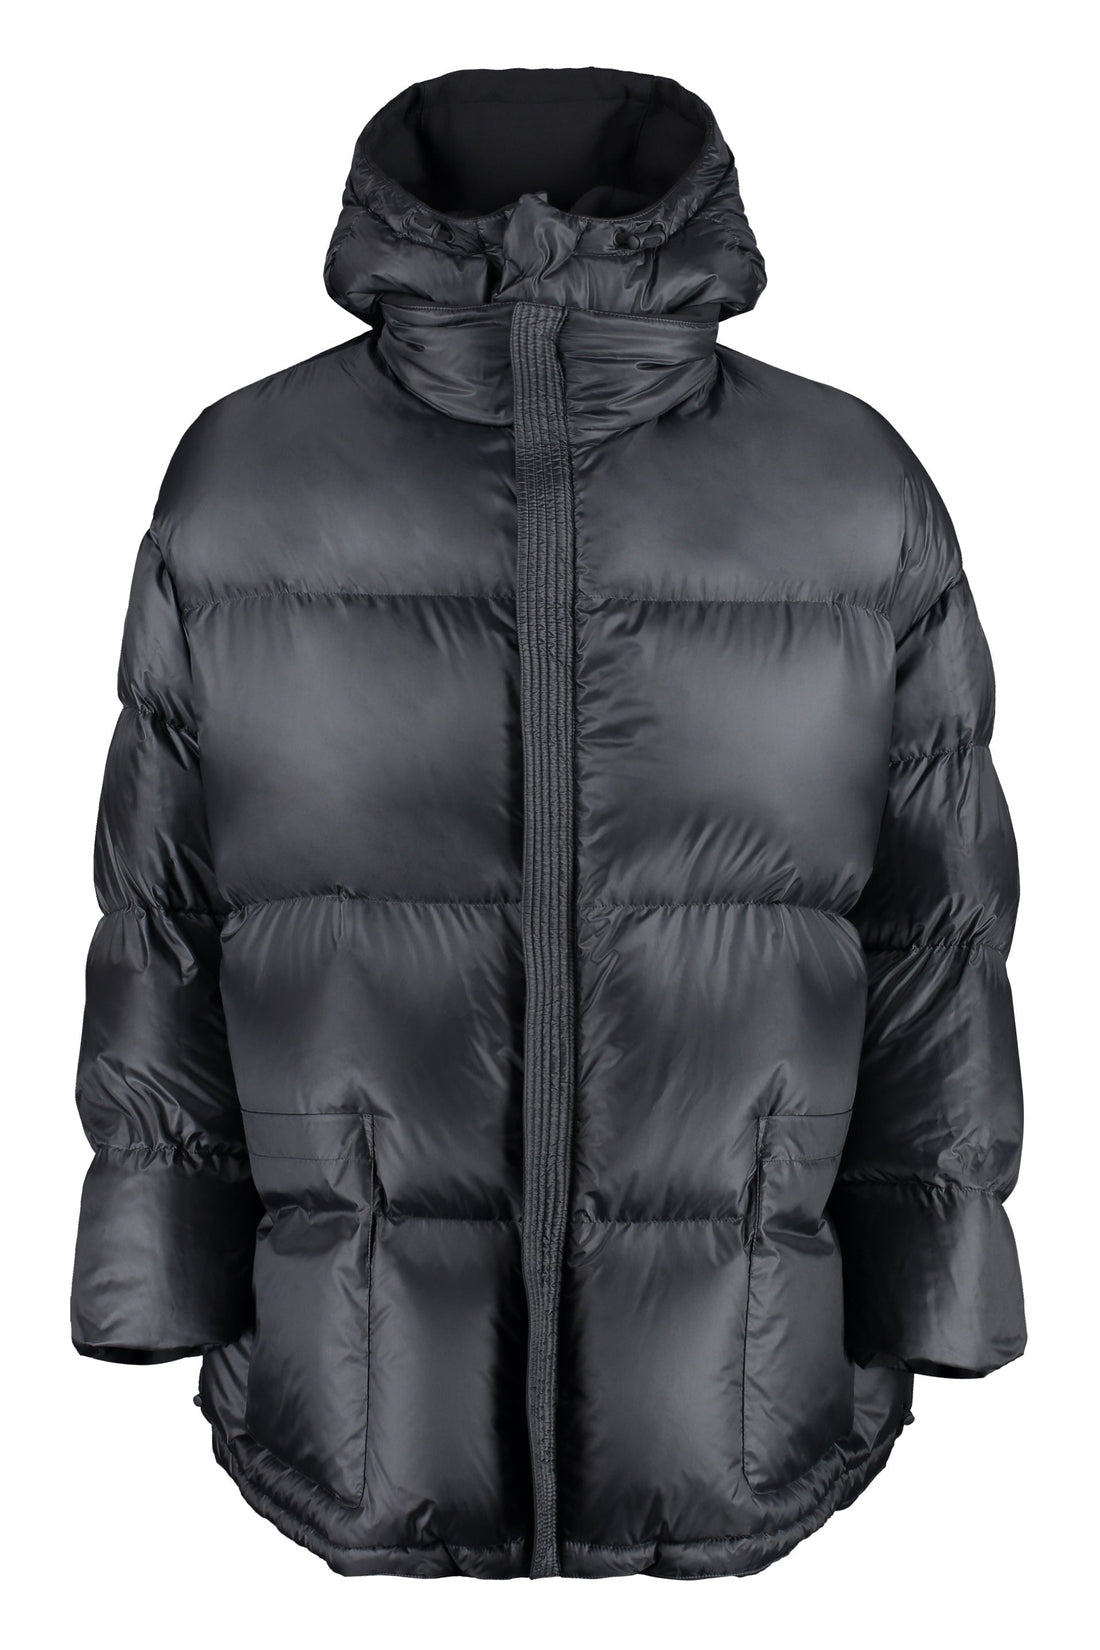 Valentino-OUTLET-SALE-Reversible hooded down jacket-ARCHIVIST